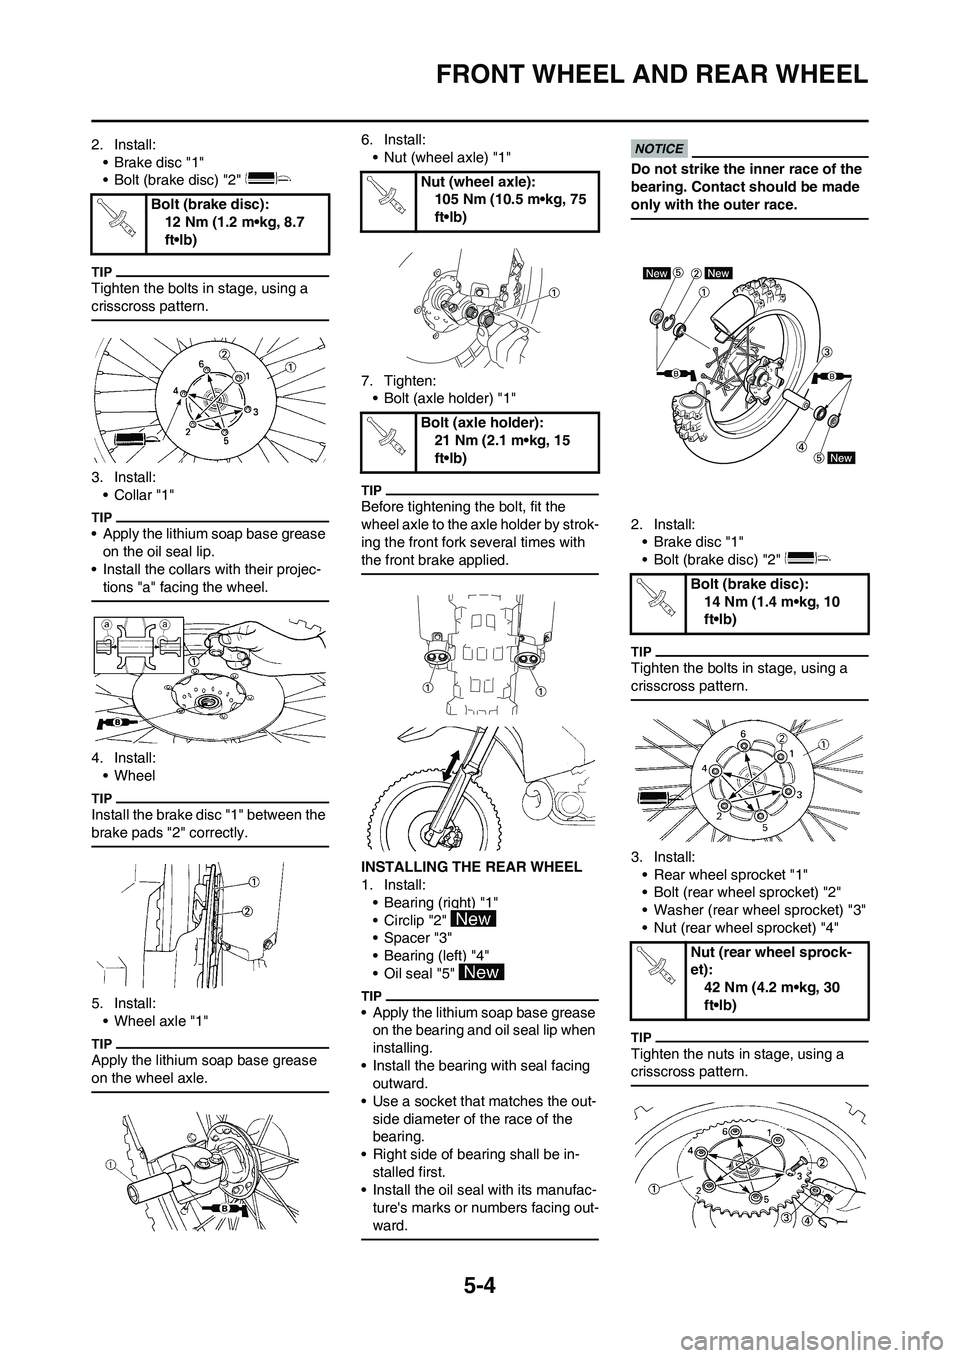 YAMAHA YZ125LC 2011  Owners Manual 5-4
FRONT WHEEL AND REAR WHEEL
2. Install:
• Brake disc "1"
• Bolt (brake disc) "2" 
Tighten the bolts in stage, using a 
crisscross pattern.
3. Install:
•Collar "1"
• Apply the lithium soap b